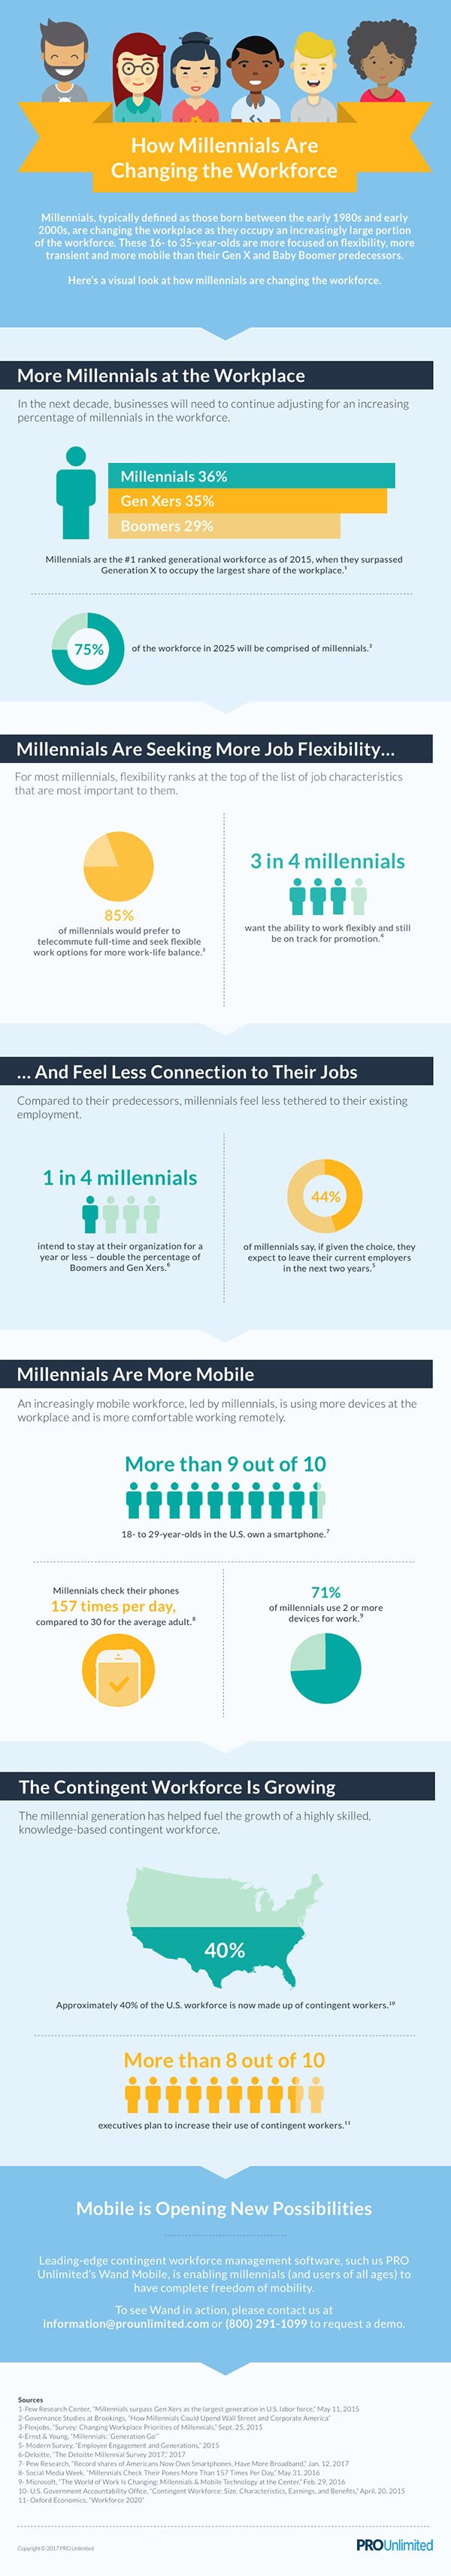 How Millennials Are Changing The Workforce